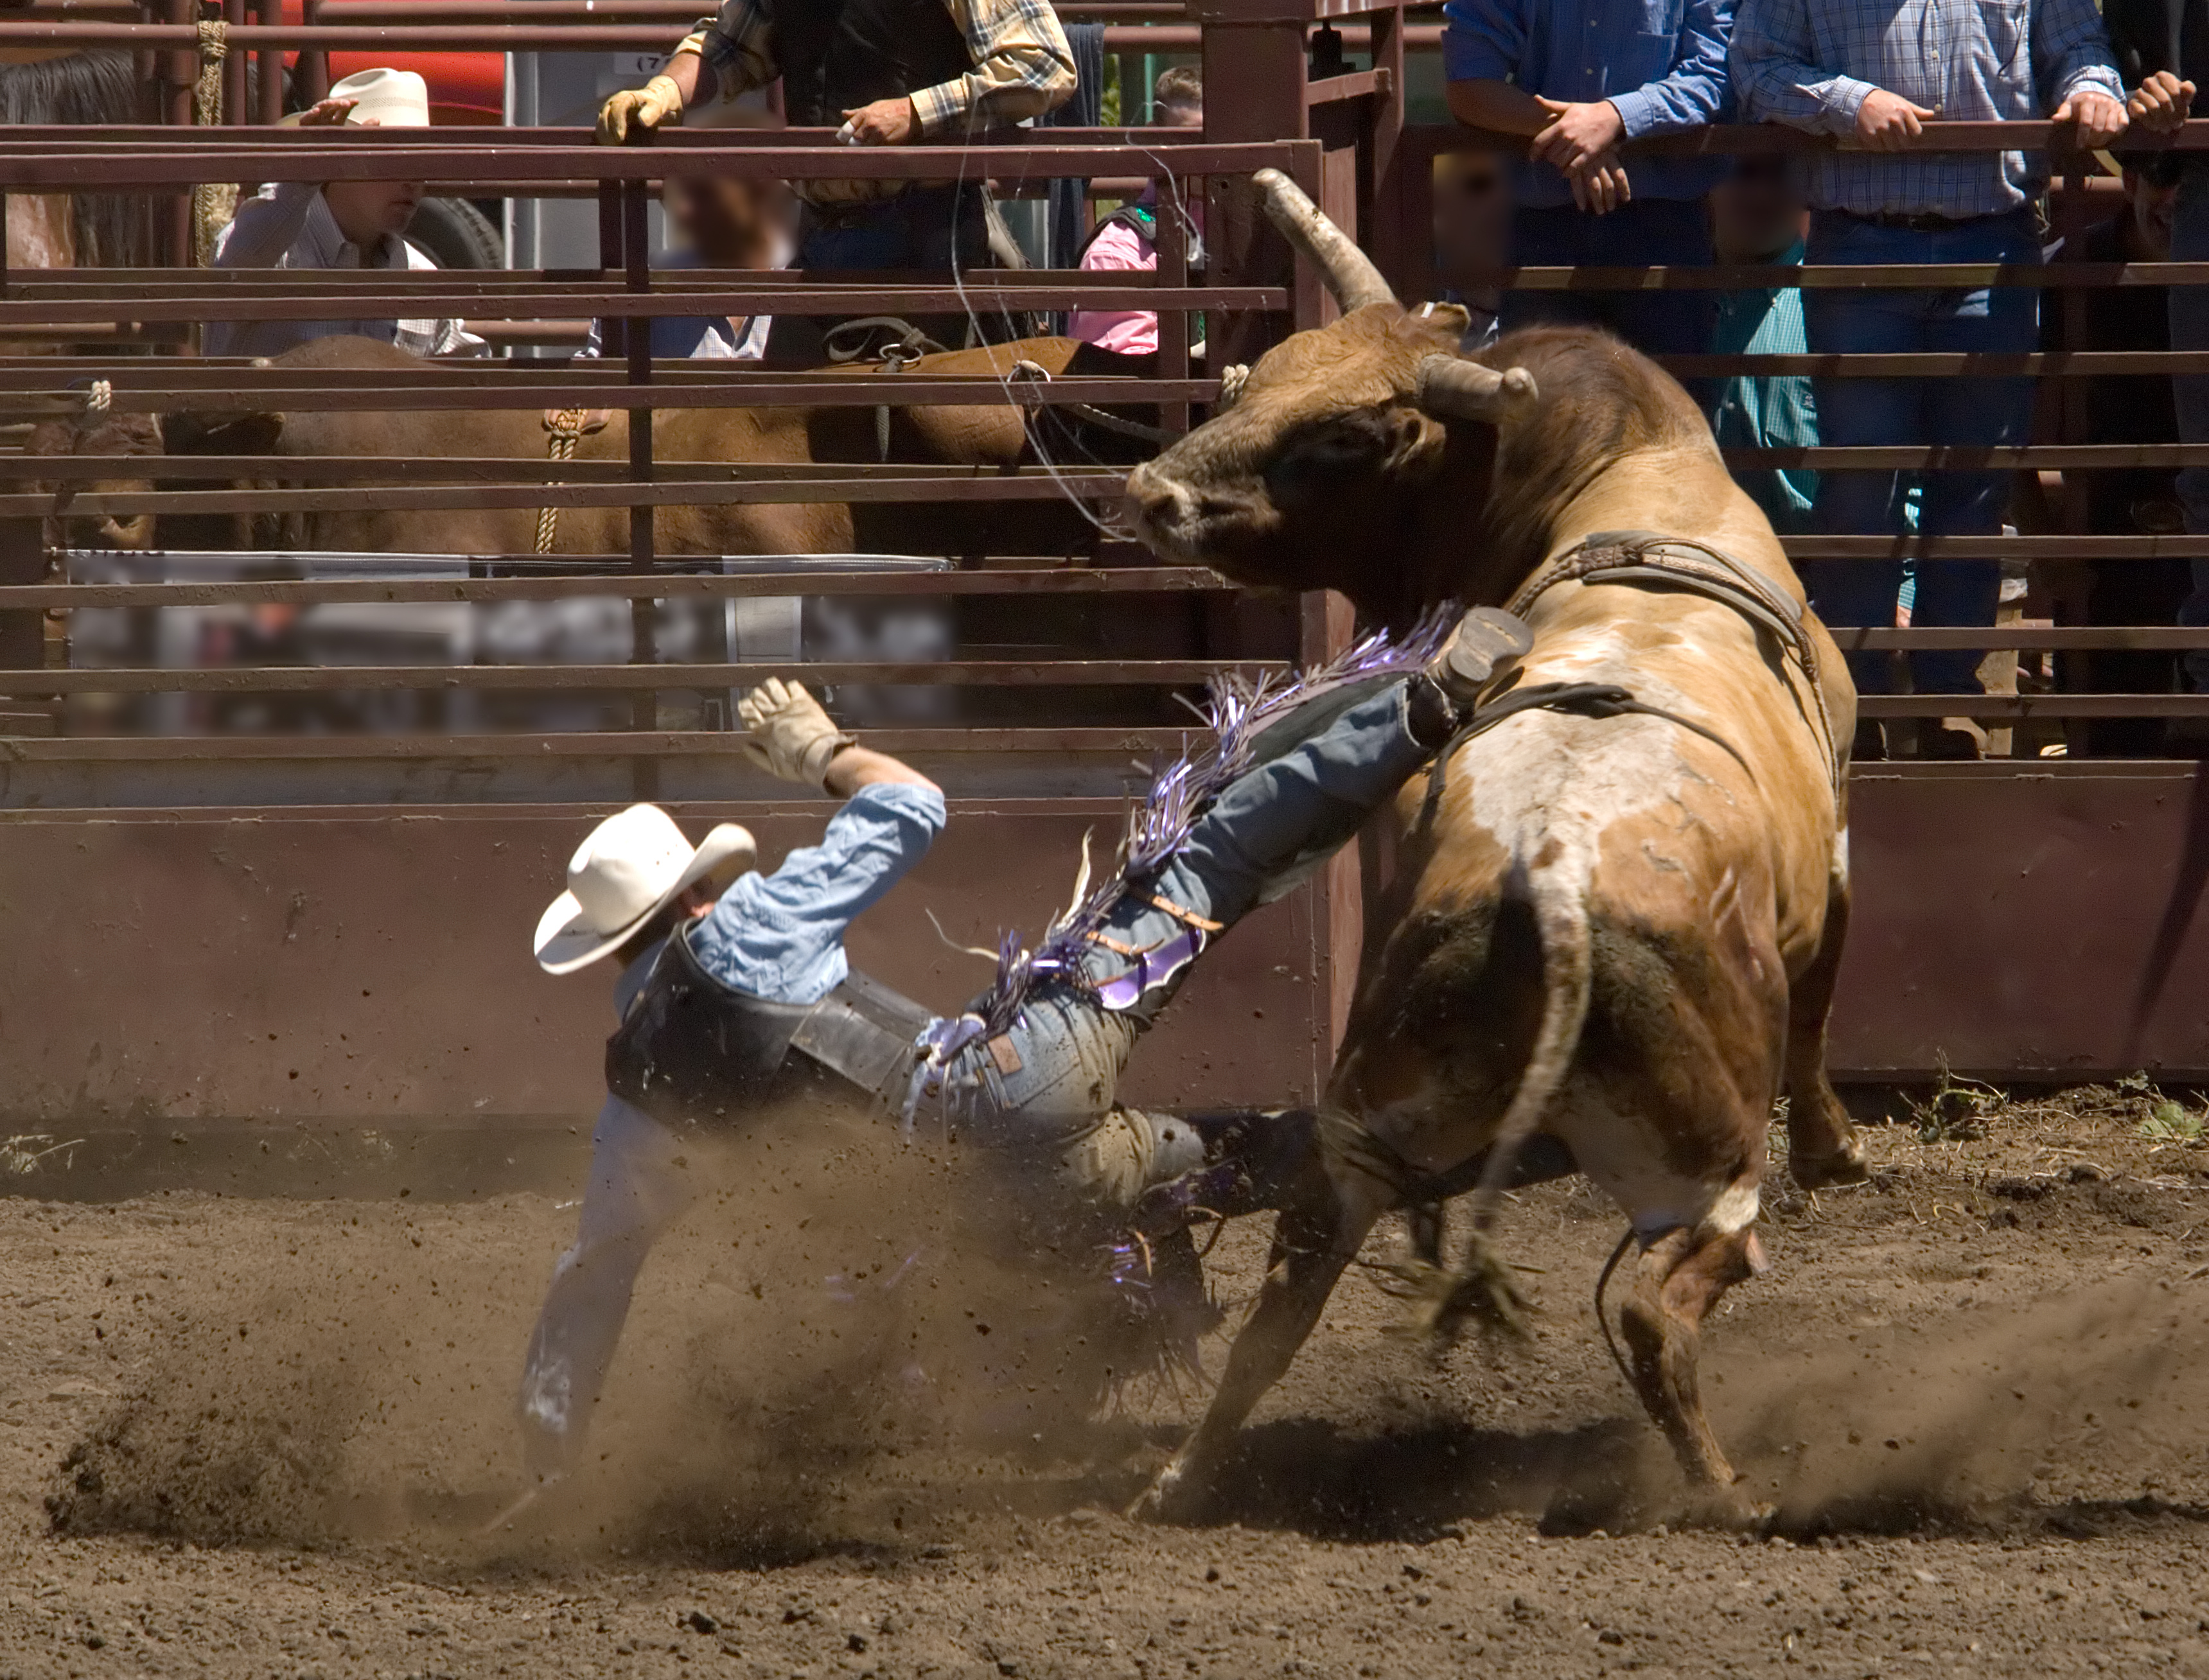 Professional Bull Riding, Monster Trucks, Fairs and Firearm Show this April